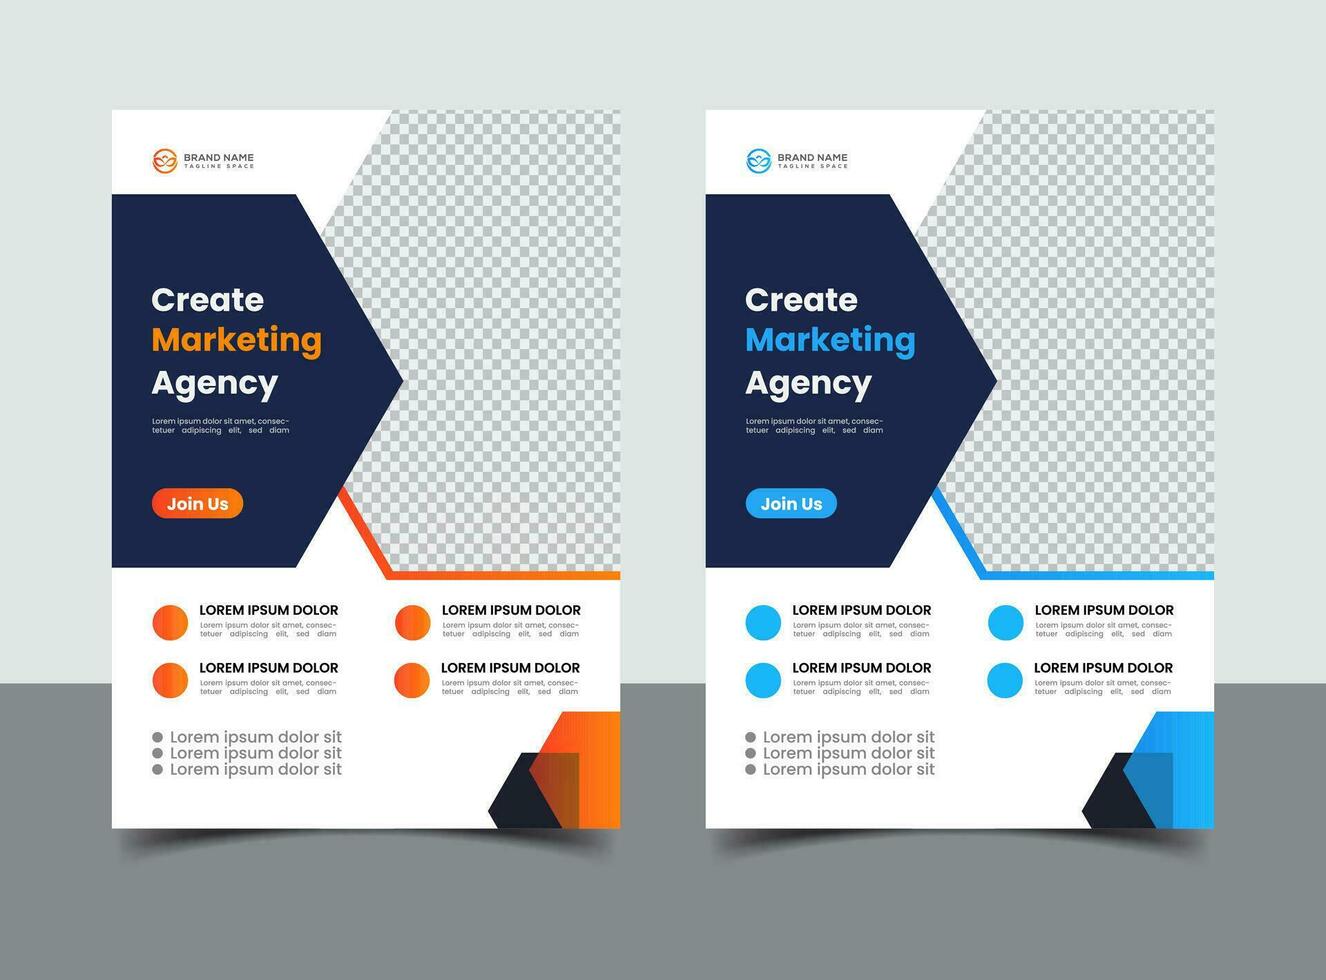 orange and blue business flyer template vector